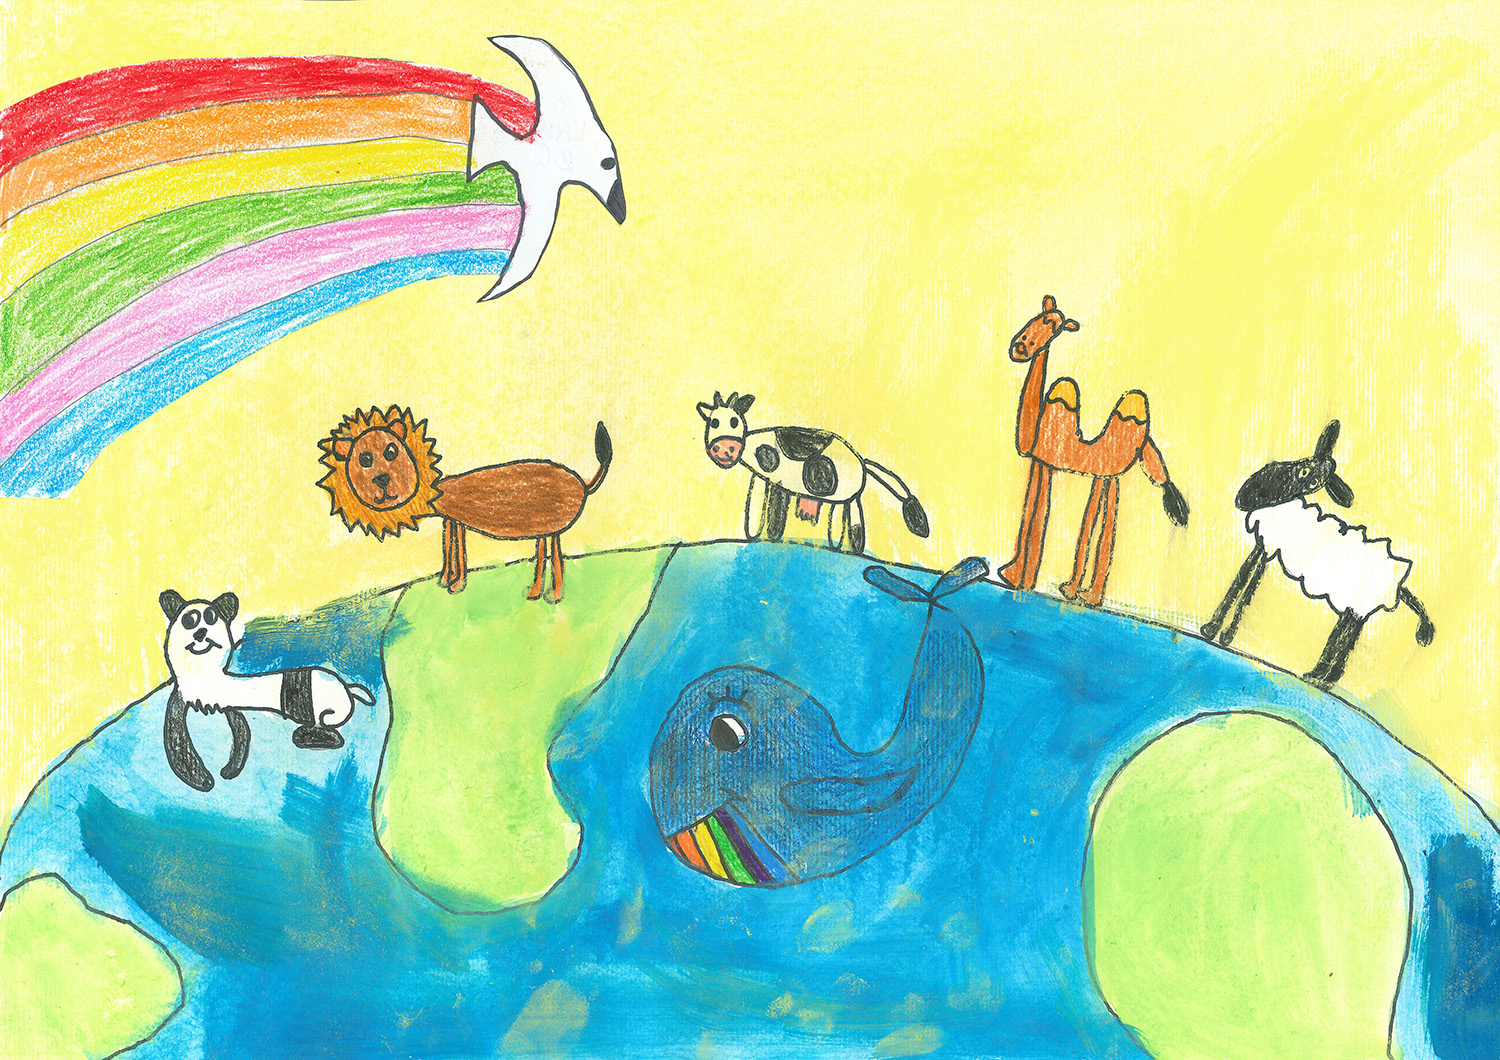 A child's tshirt design showing various cartoon animals lined up on top of a stylised globe